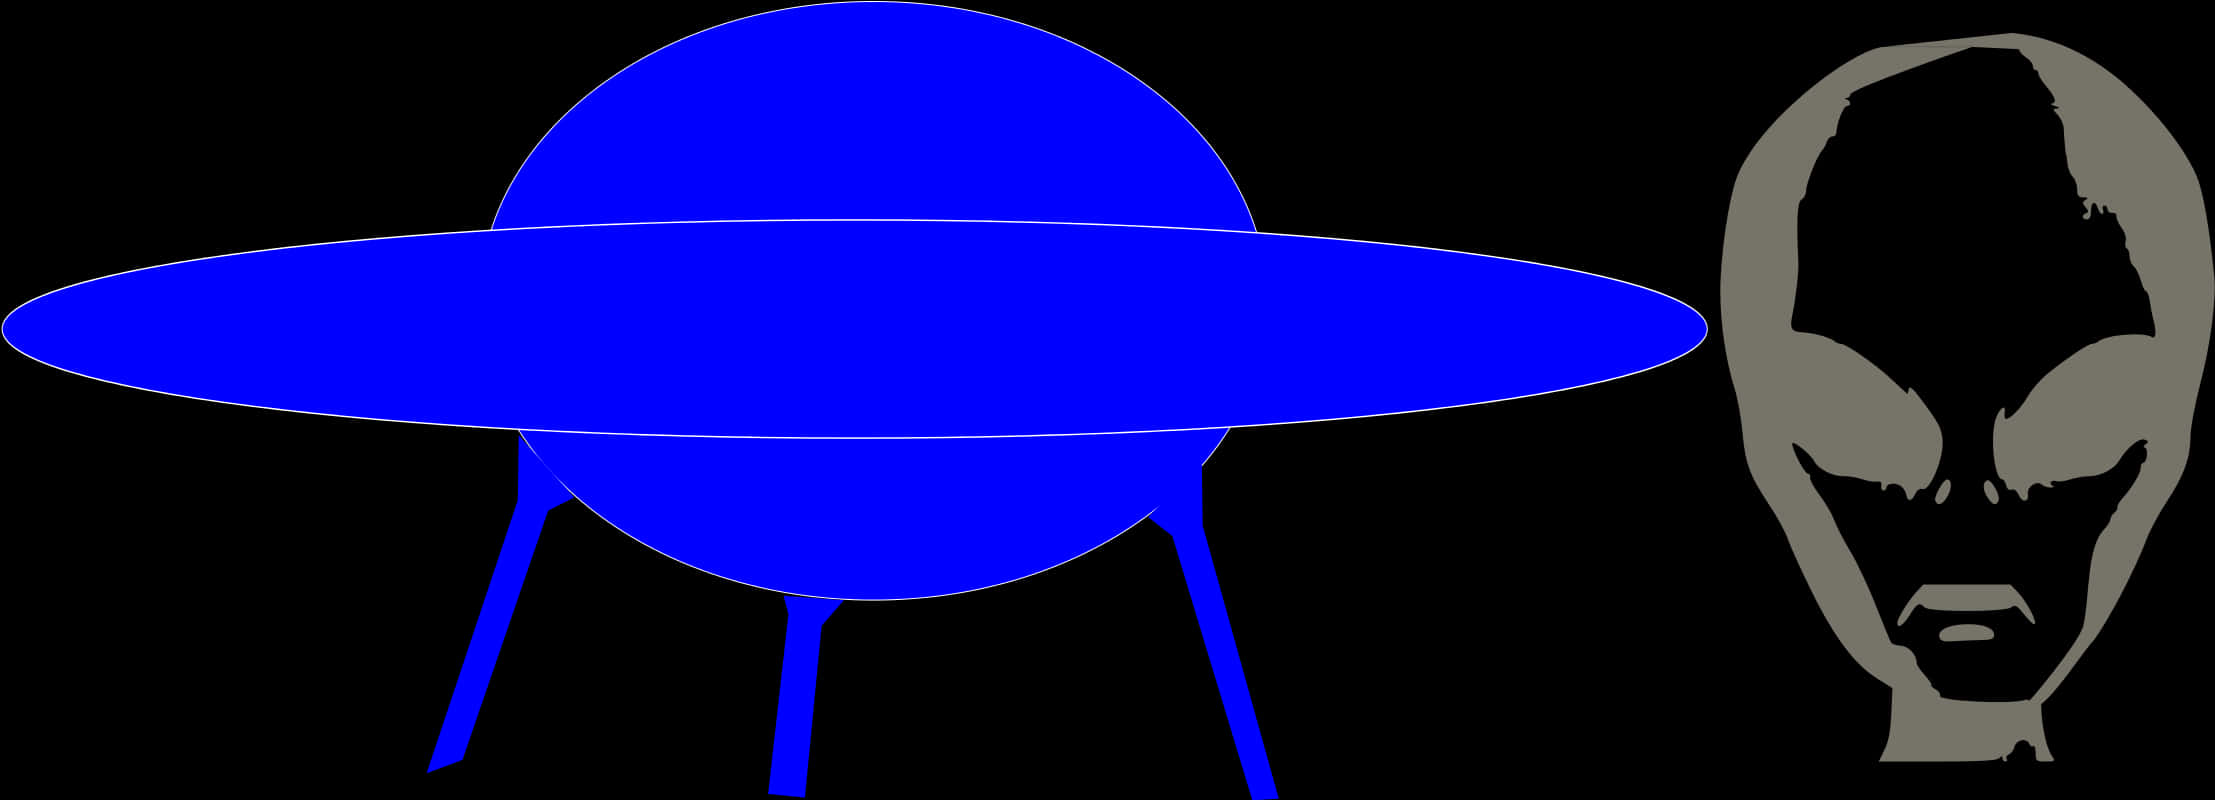 A Blue Object With Legs